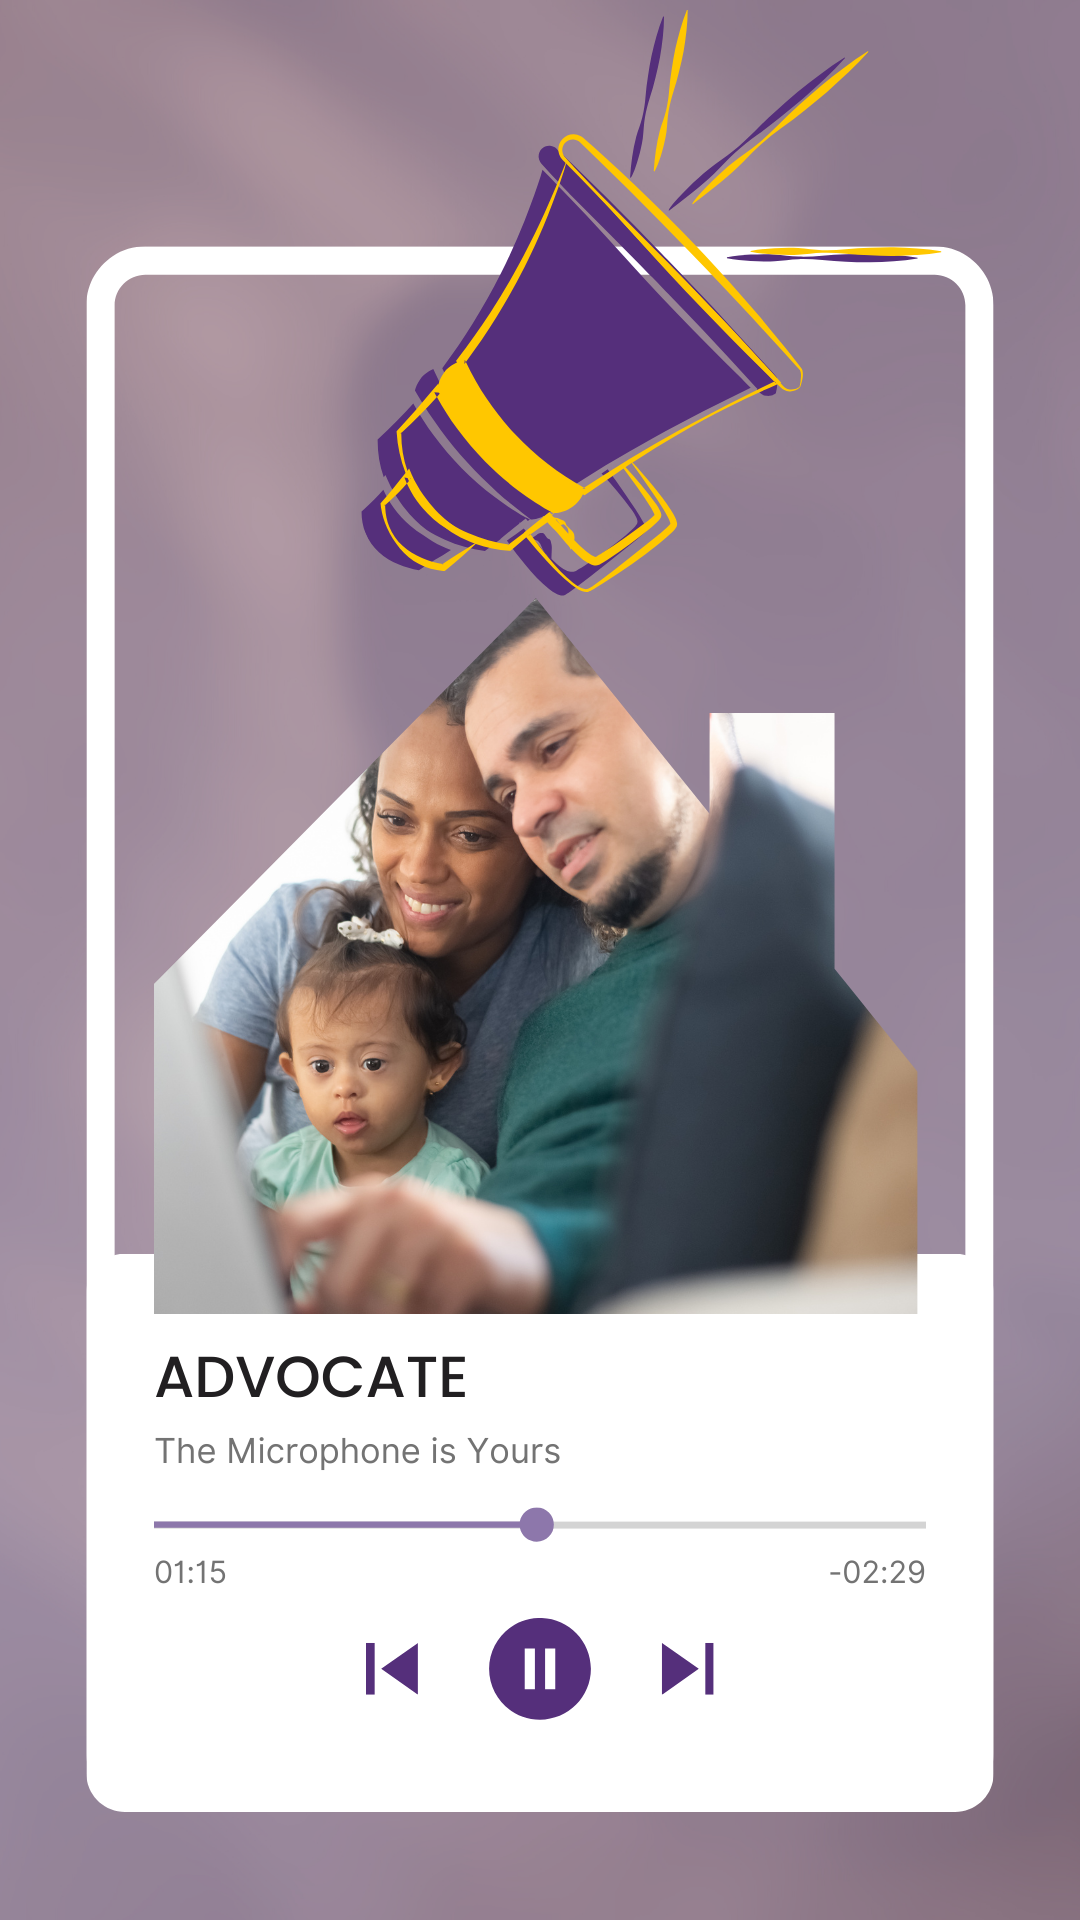 Image Description: A tie dye purple and gray background with a white podcast frame, featuring a house sharped photo of a family of 3. Above them is a bullhorn. The Podcast Title is ADVOCATE.